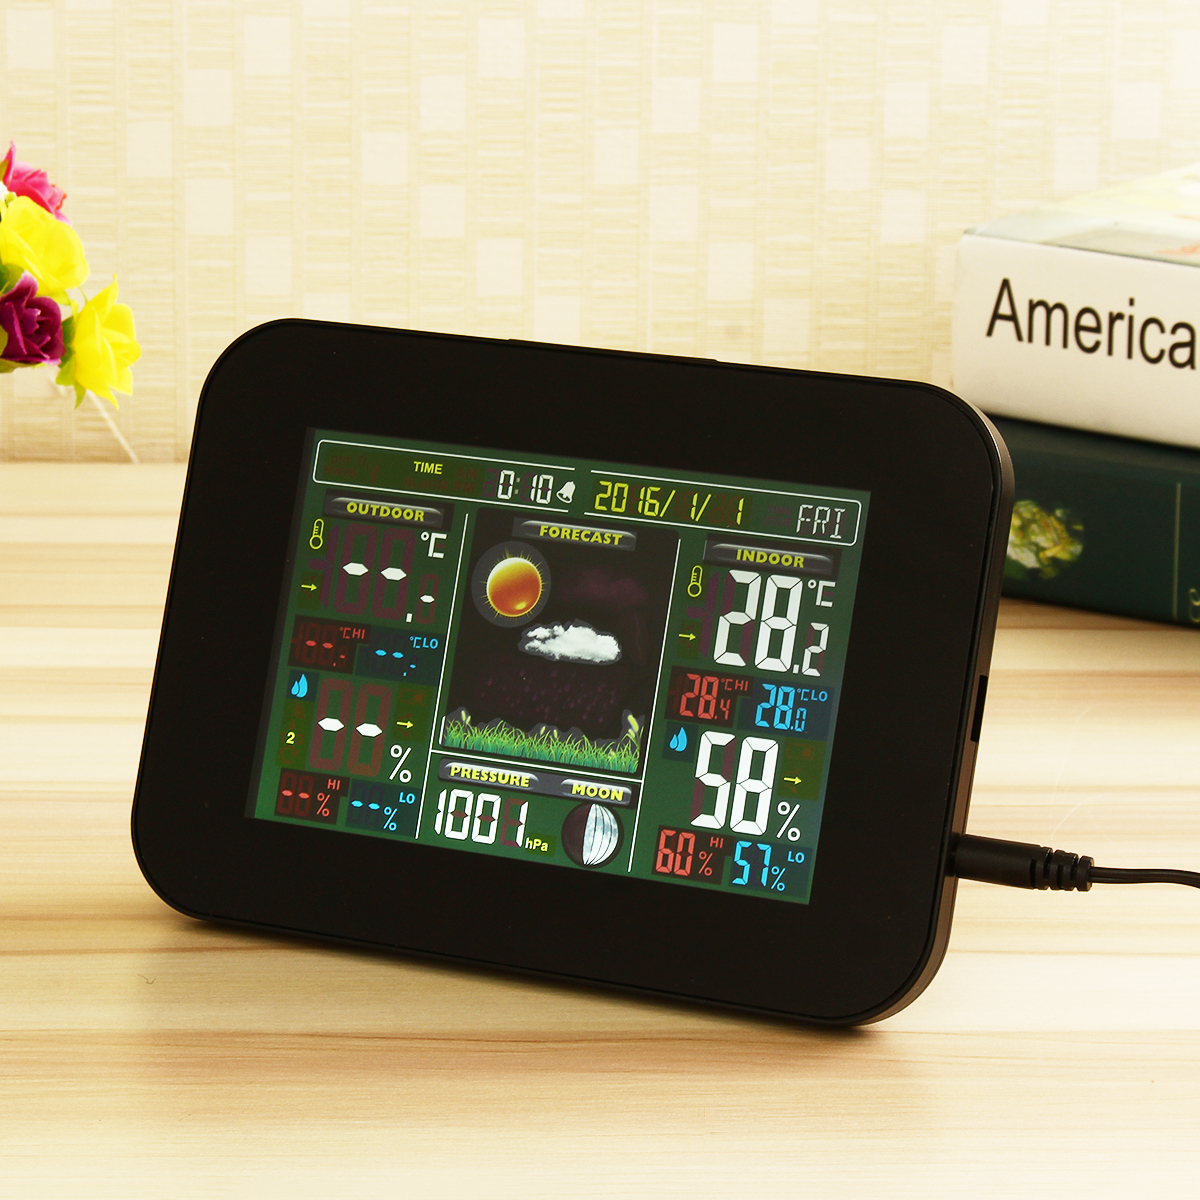 

Digital Wireless Weather Forecast Station Temperature Humidity Thermometer Alarm Clock Monitor